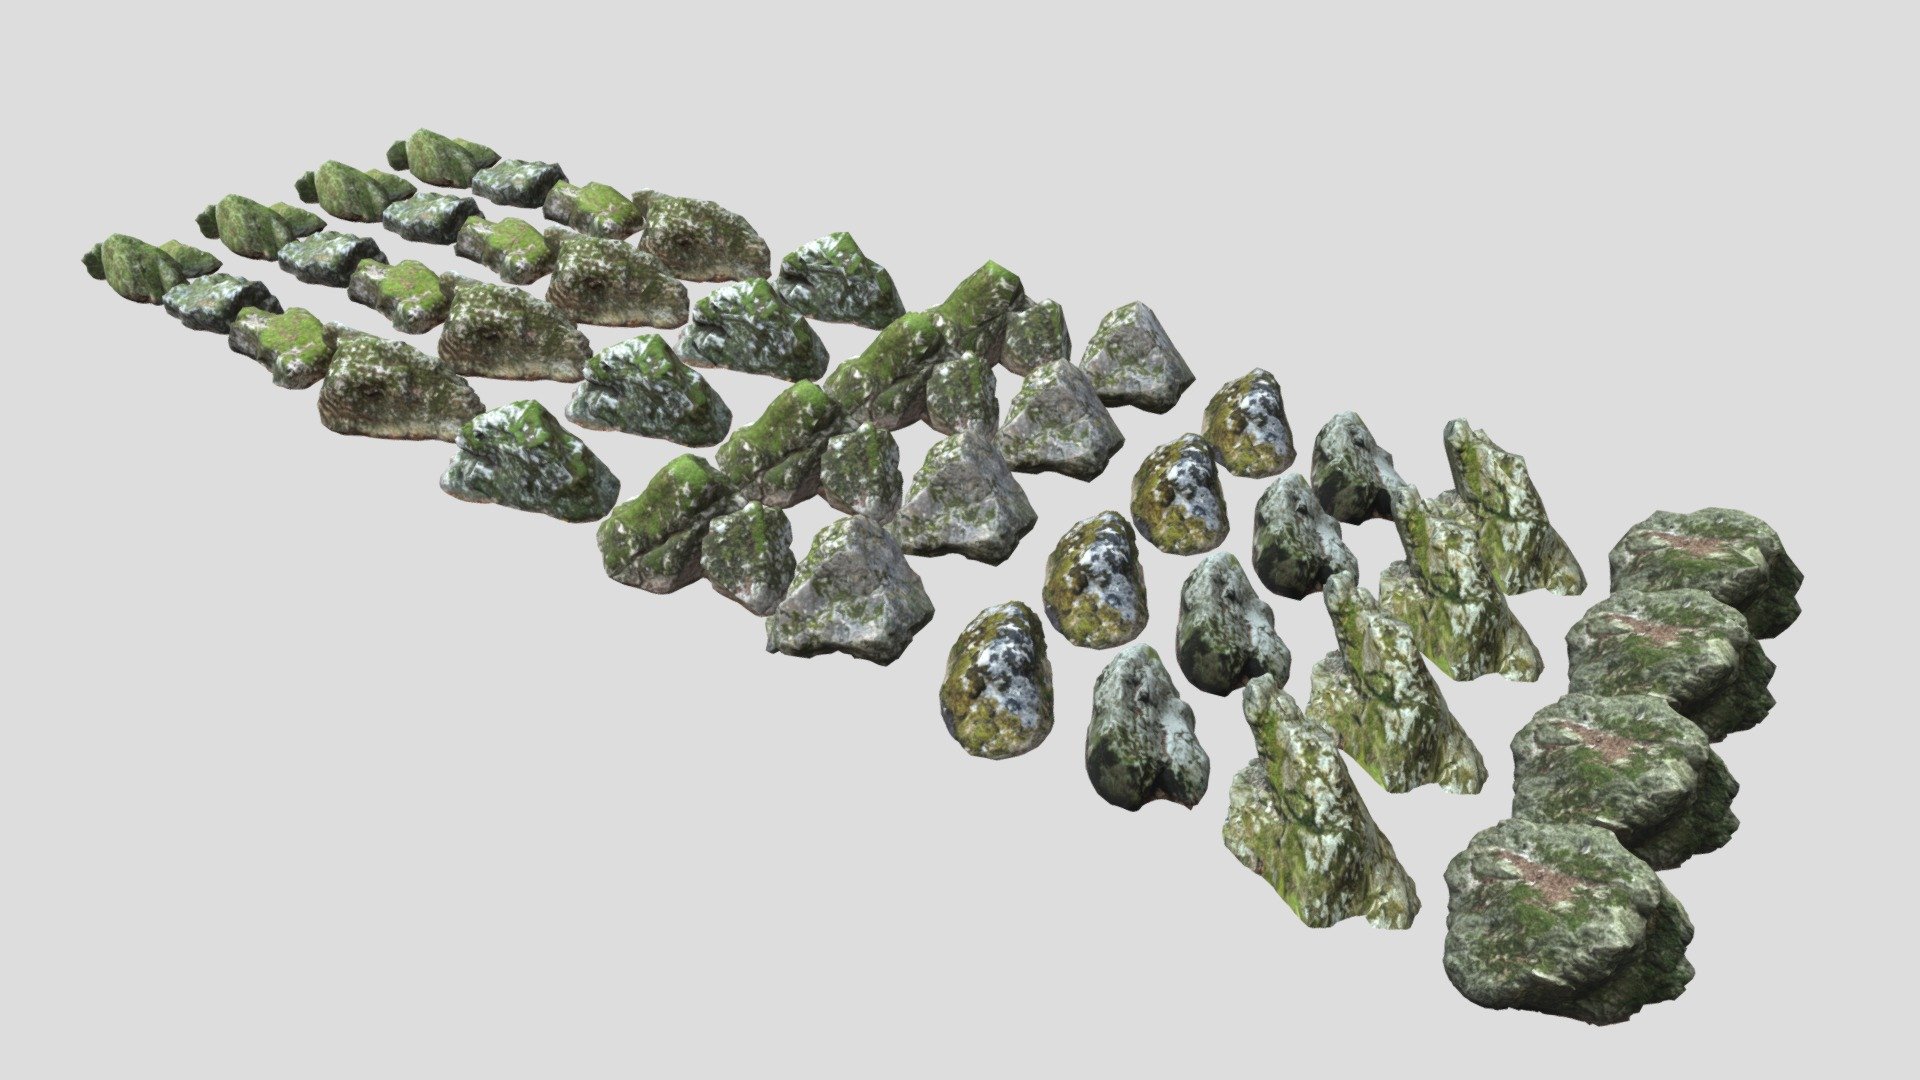 What you get in this pack:
- 11 unique models of mossy rocks from the forest (each with 4 LOD levels, ranging from 2,450 to 120 triangles –&gt; total of 28 models)
- 4k textures (+ 2k normal)

You can easily use these models as game-assets, thanks to the different LOD levels (polycount optimisation for further away models) and the texture atlases (rocks 1,2,3 combined into 1 texture atlas &amp; rocks 4,5,6,7 combine into another single texture atlas).

Enjoy, and happy modeling! - 11 Mossy Rocks Pack - Buy Royalty Free 3D model by atti1234 3d model